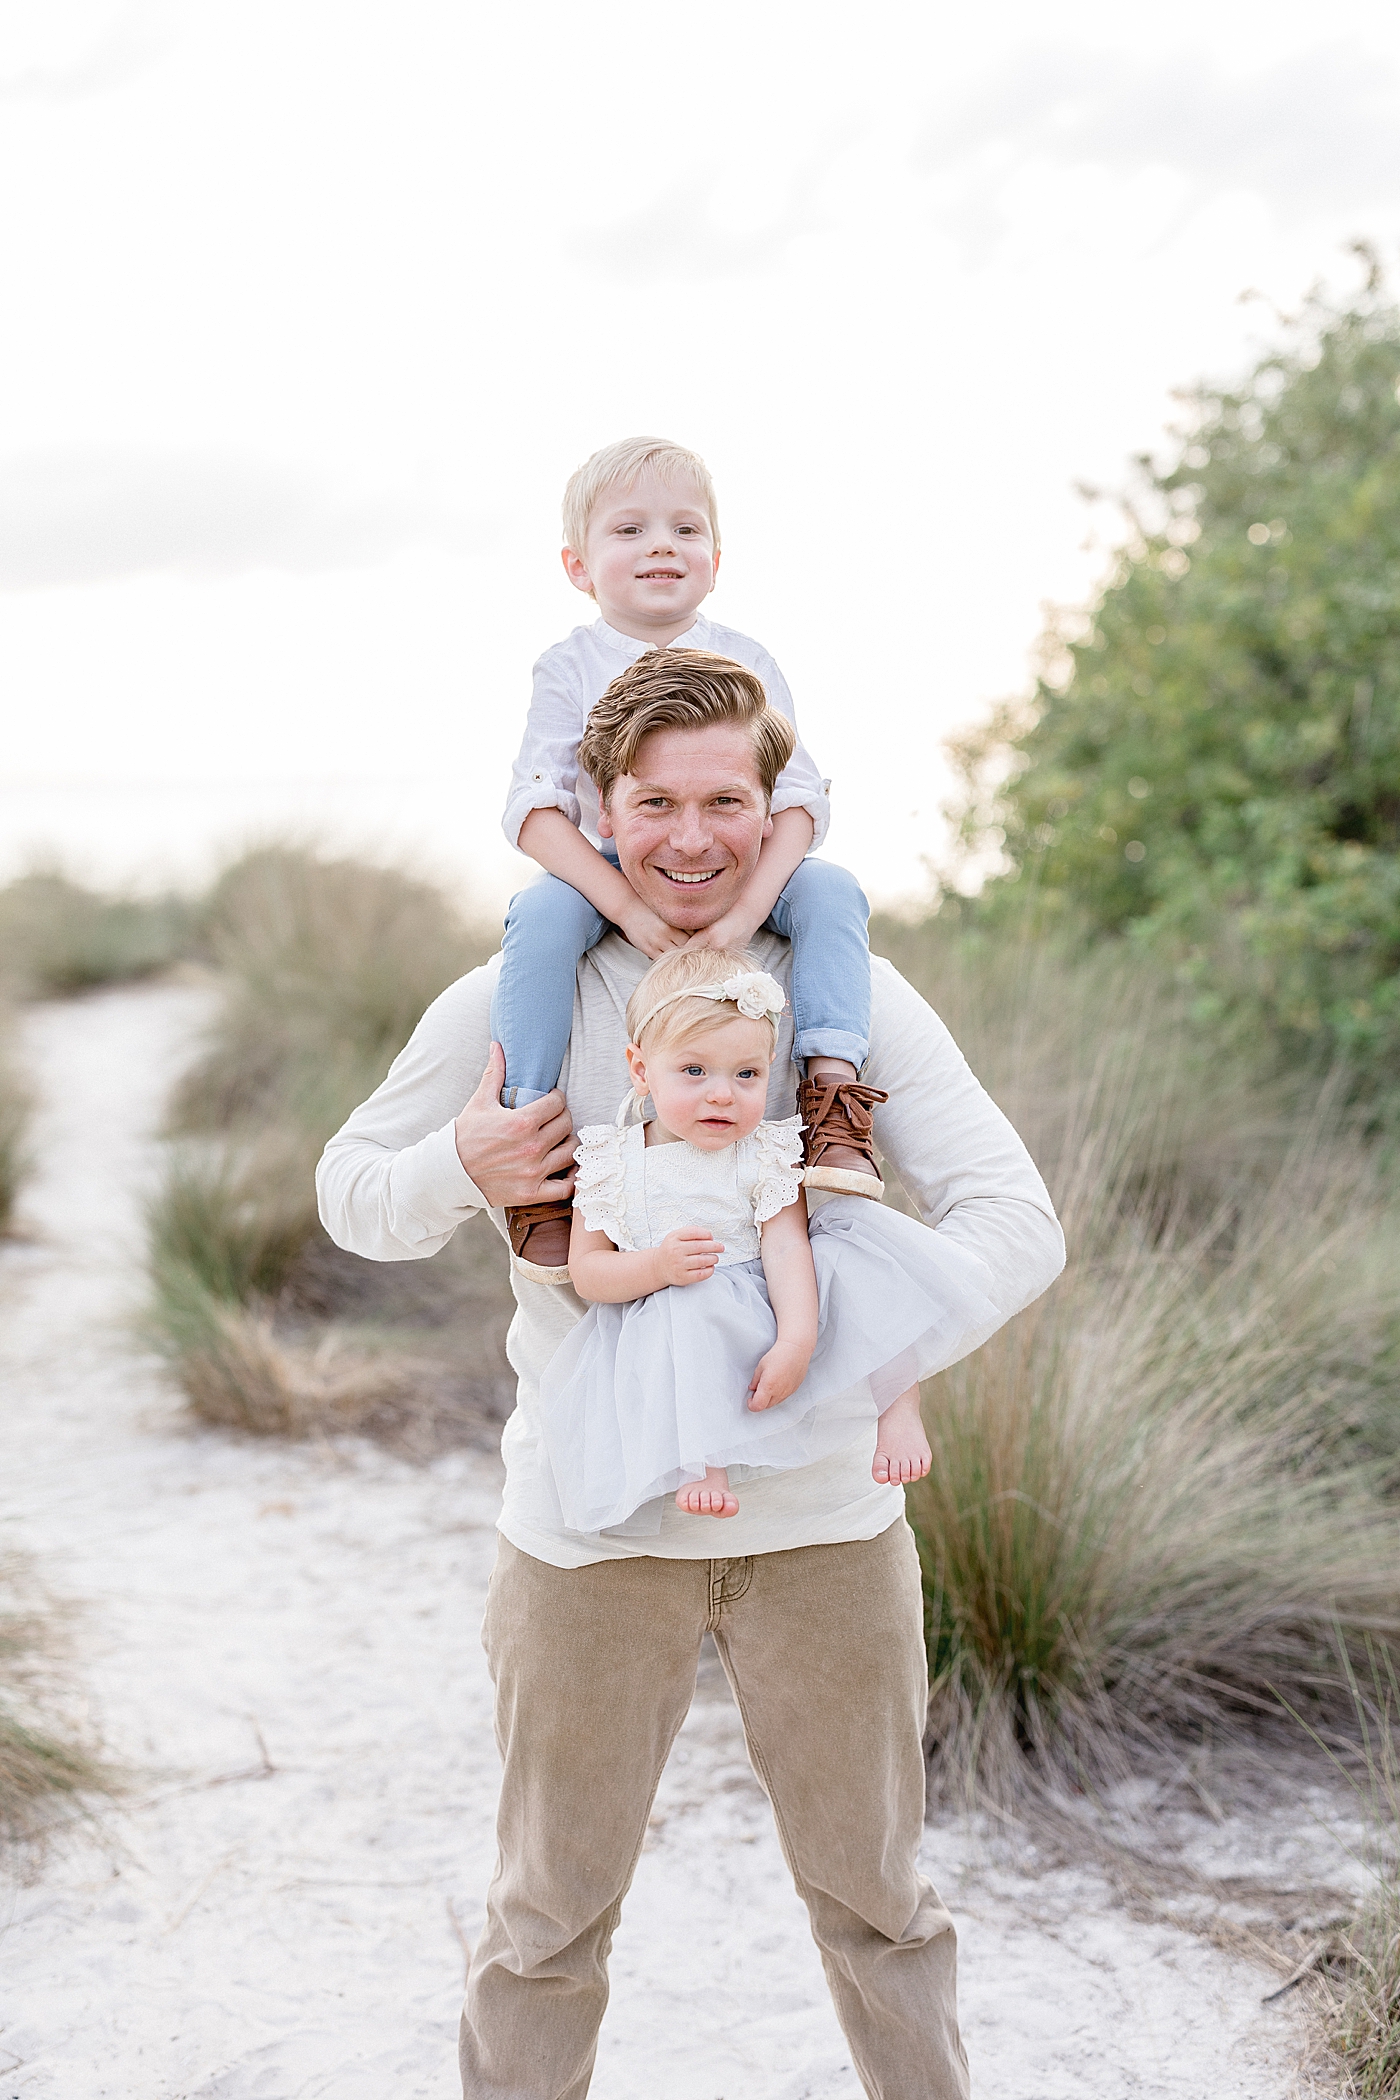 Dad holding both of his children for a photo at Cypress Point Park. Photo by Brittany Elise Photography.